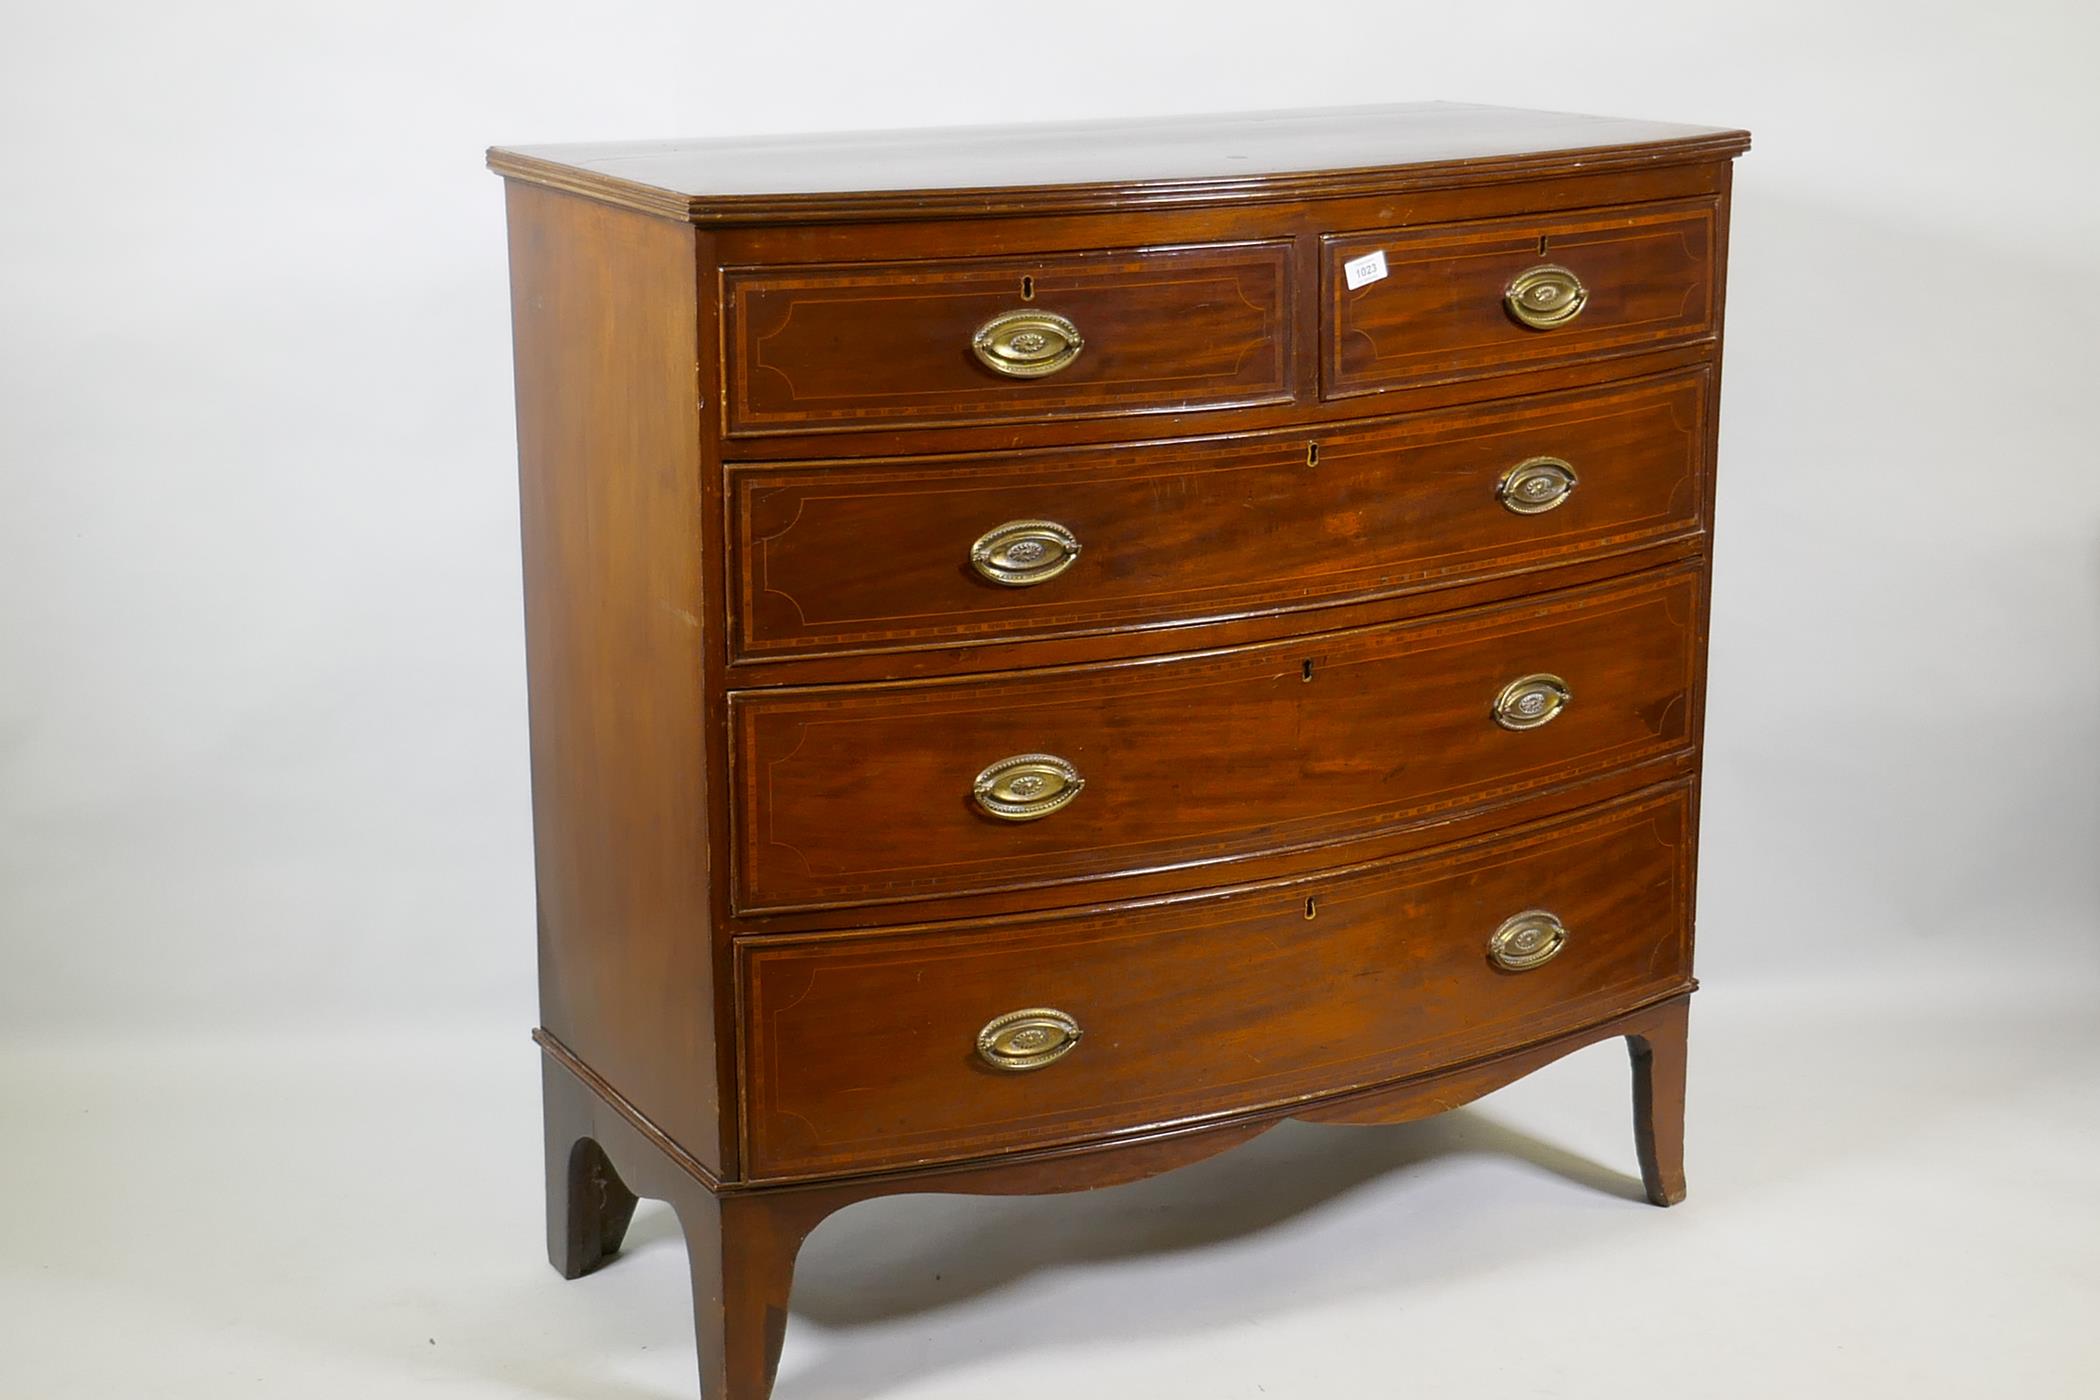 A George III inlaid mahogany bowfront chest of two plus three drawers, with brass plate handles, - Image 3 of 3